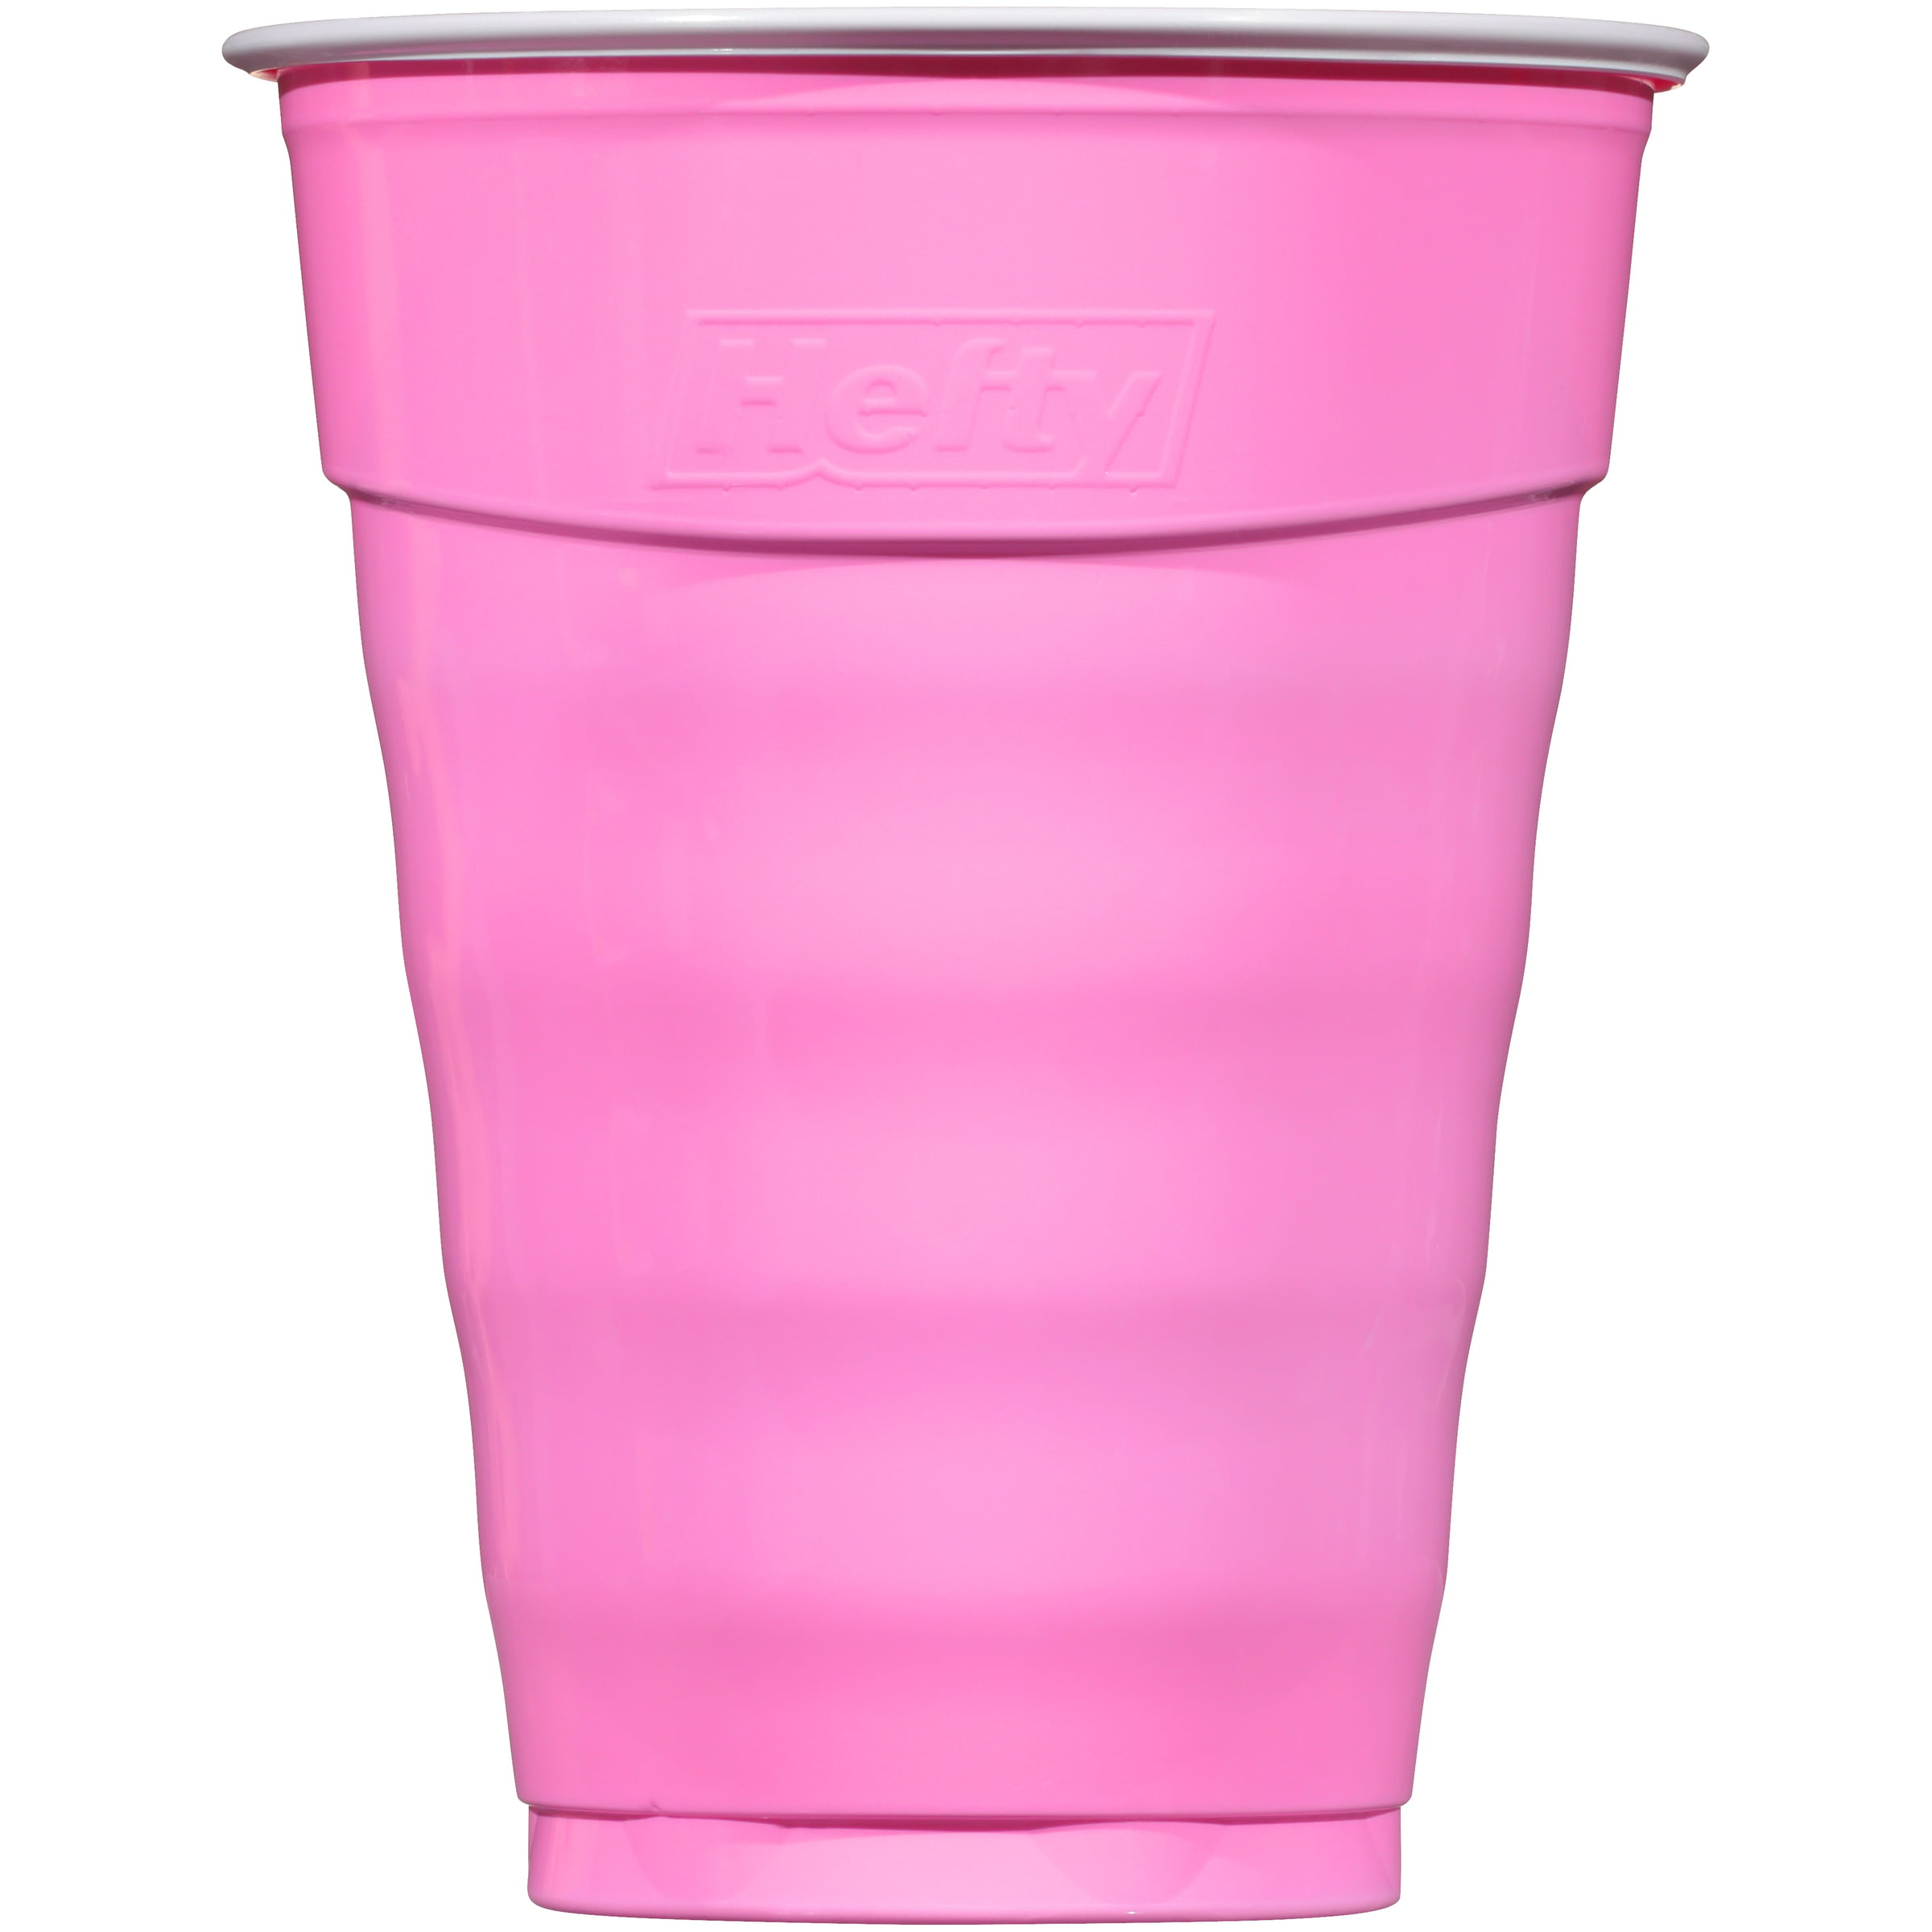 Solo or Hefty Plastic Cups 18oz 25CT